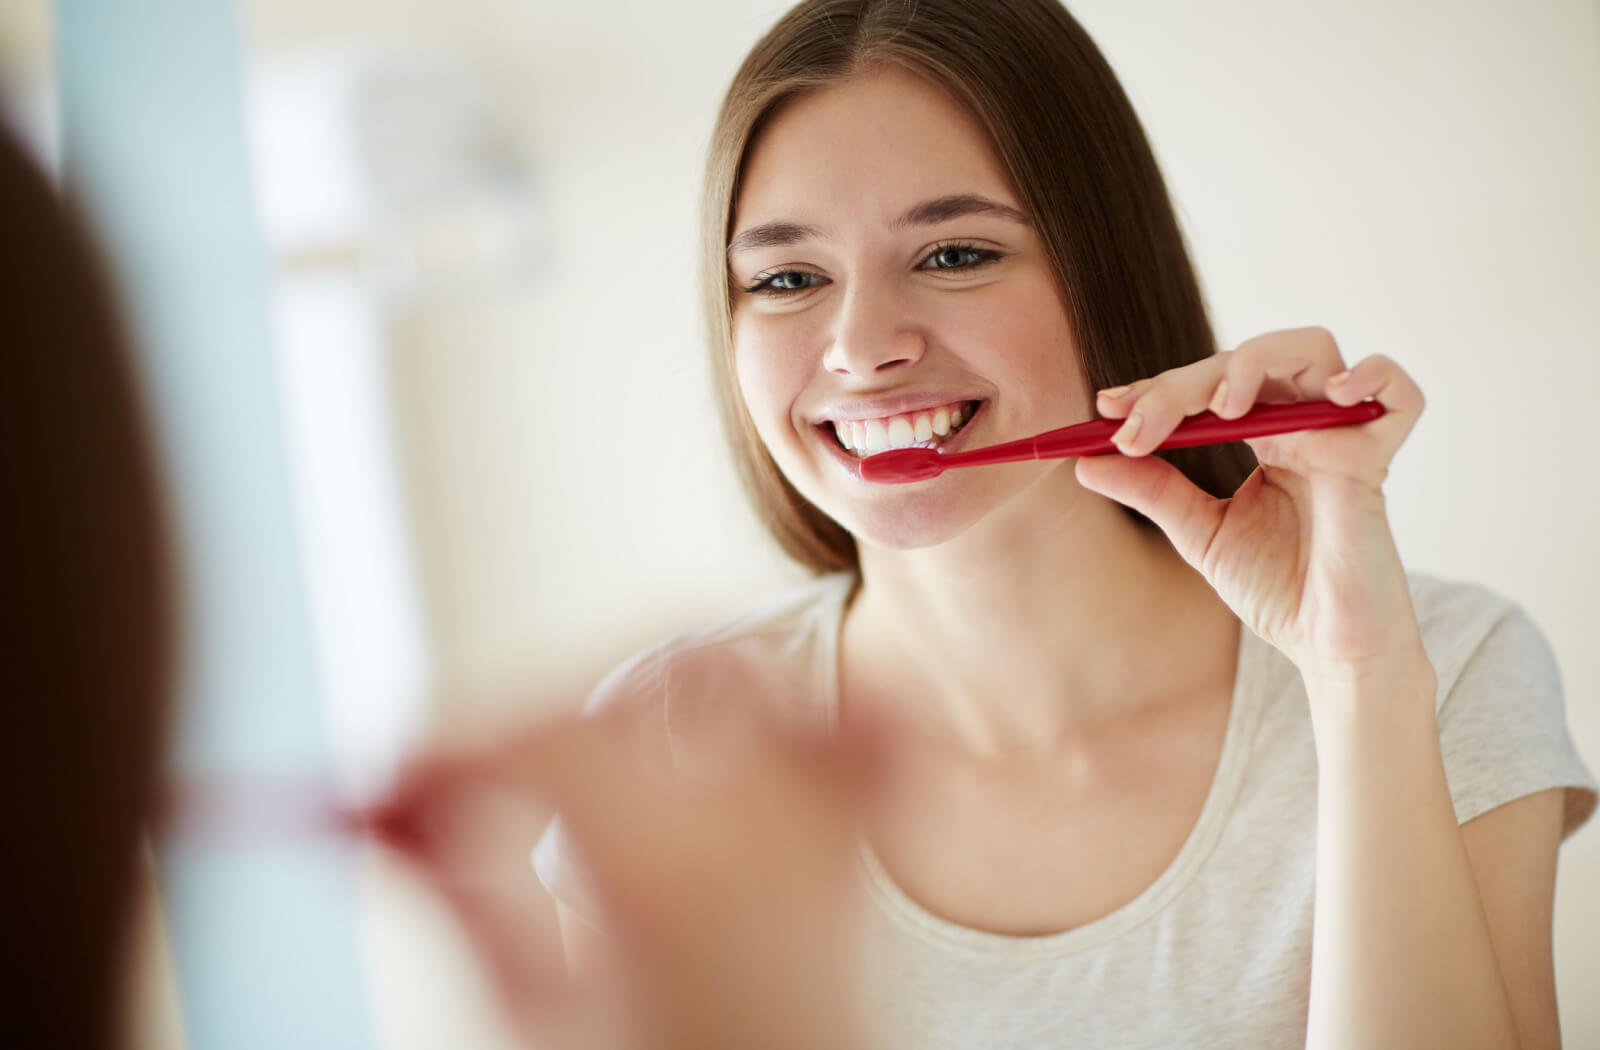 A young woman standing in front of a mirror brushing her teeth with a toothbrush.